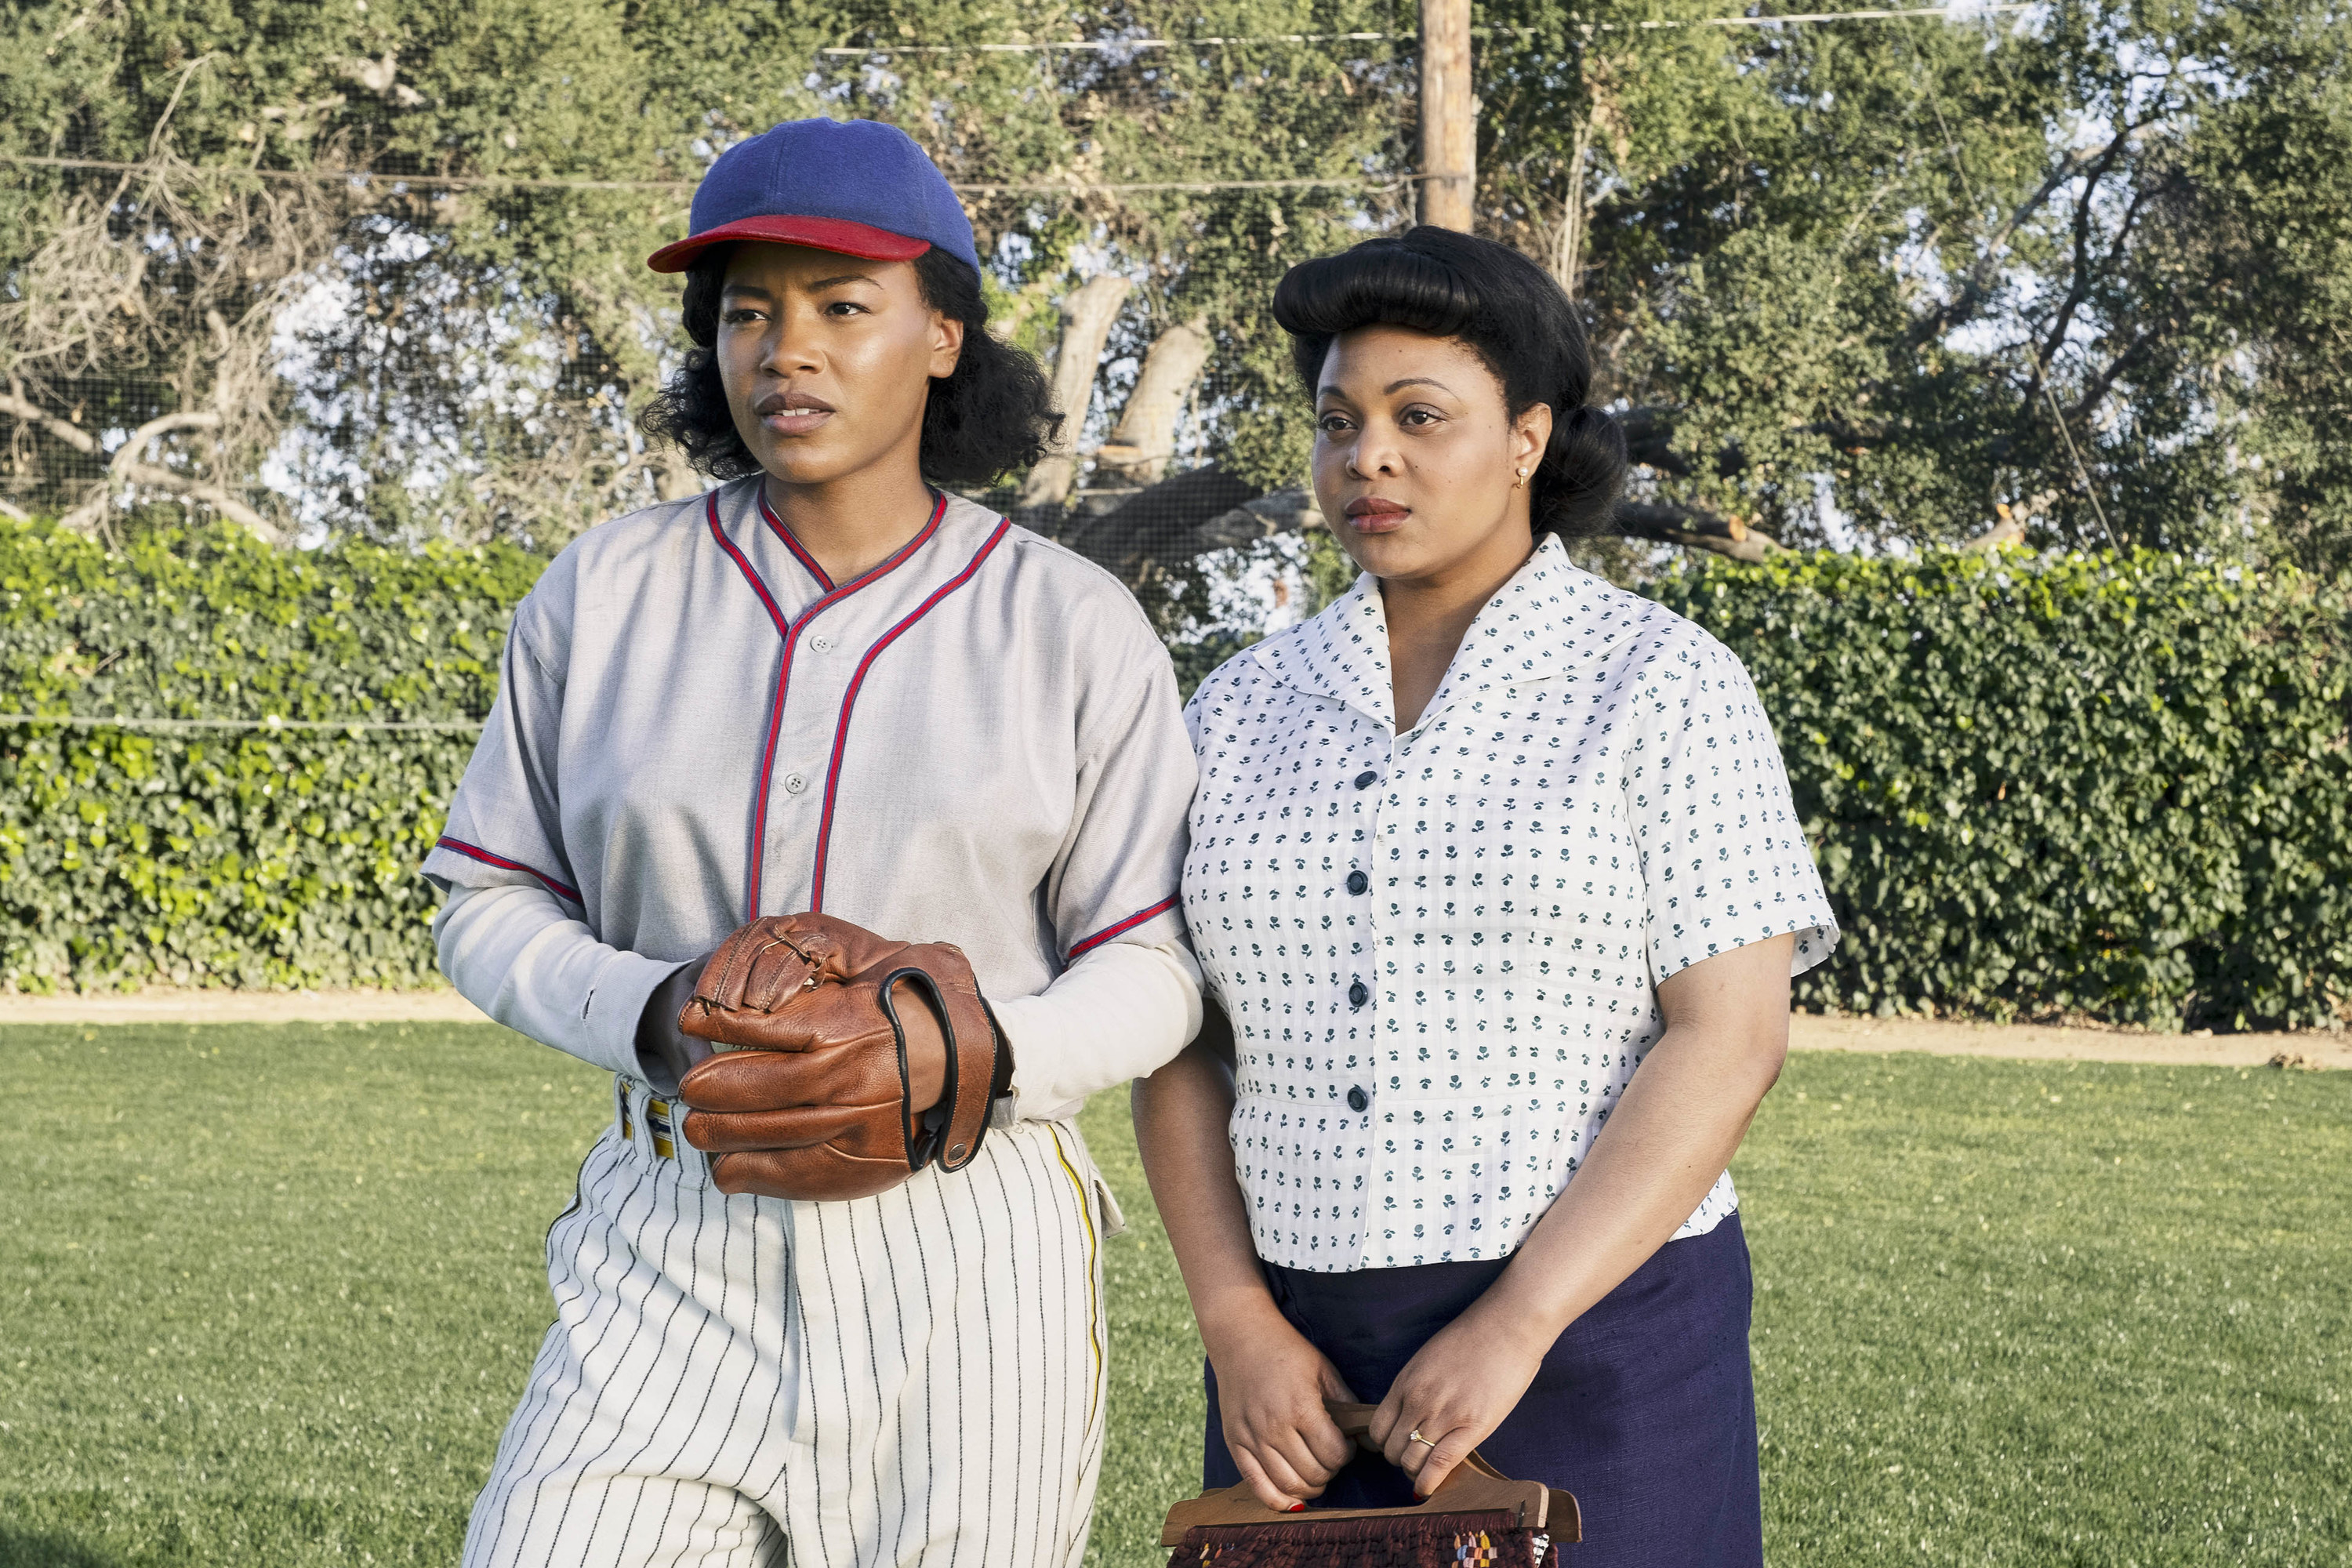 Two black women standing next to each other while one is in a baseball uniform